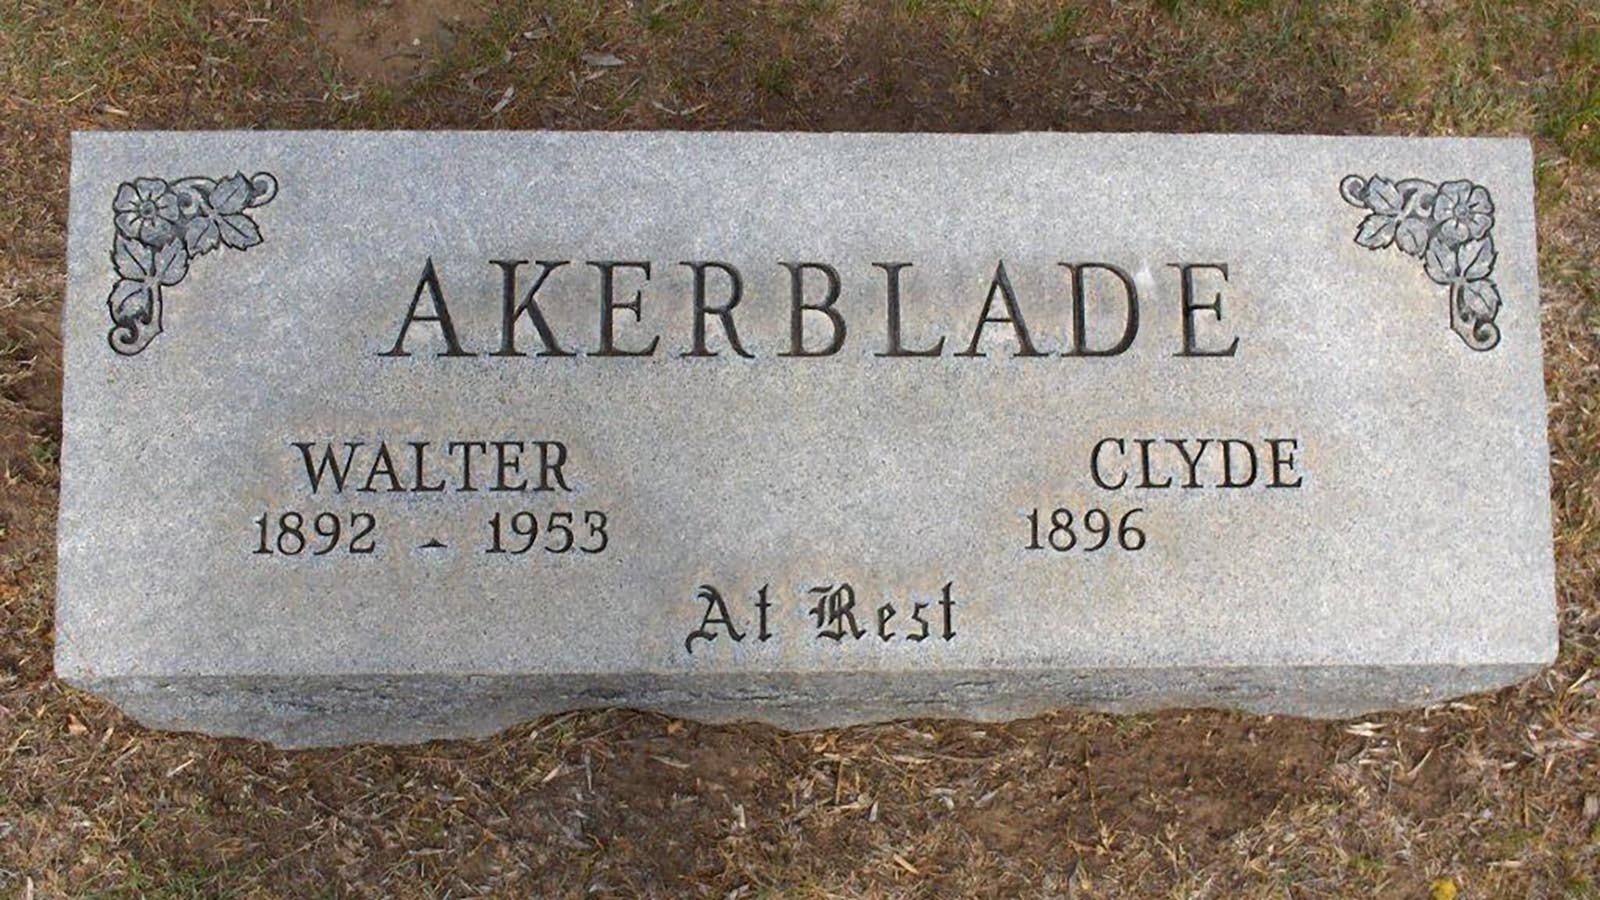 The grave of Walter Akerblade, gunned down by Tricky Riggle in 1953 in Wheatland, Wyoming.